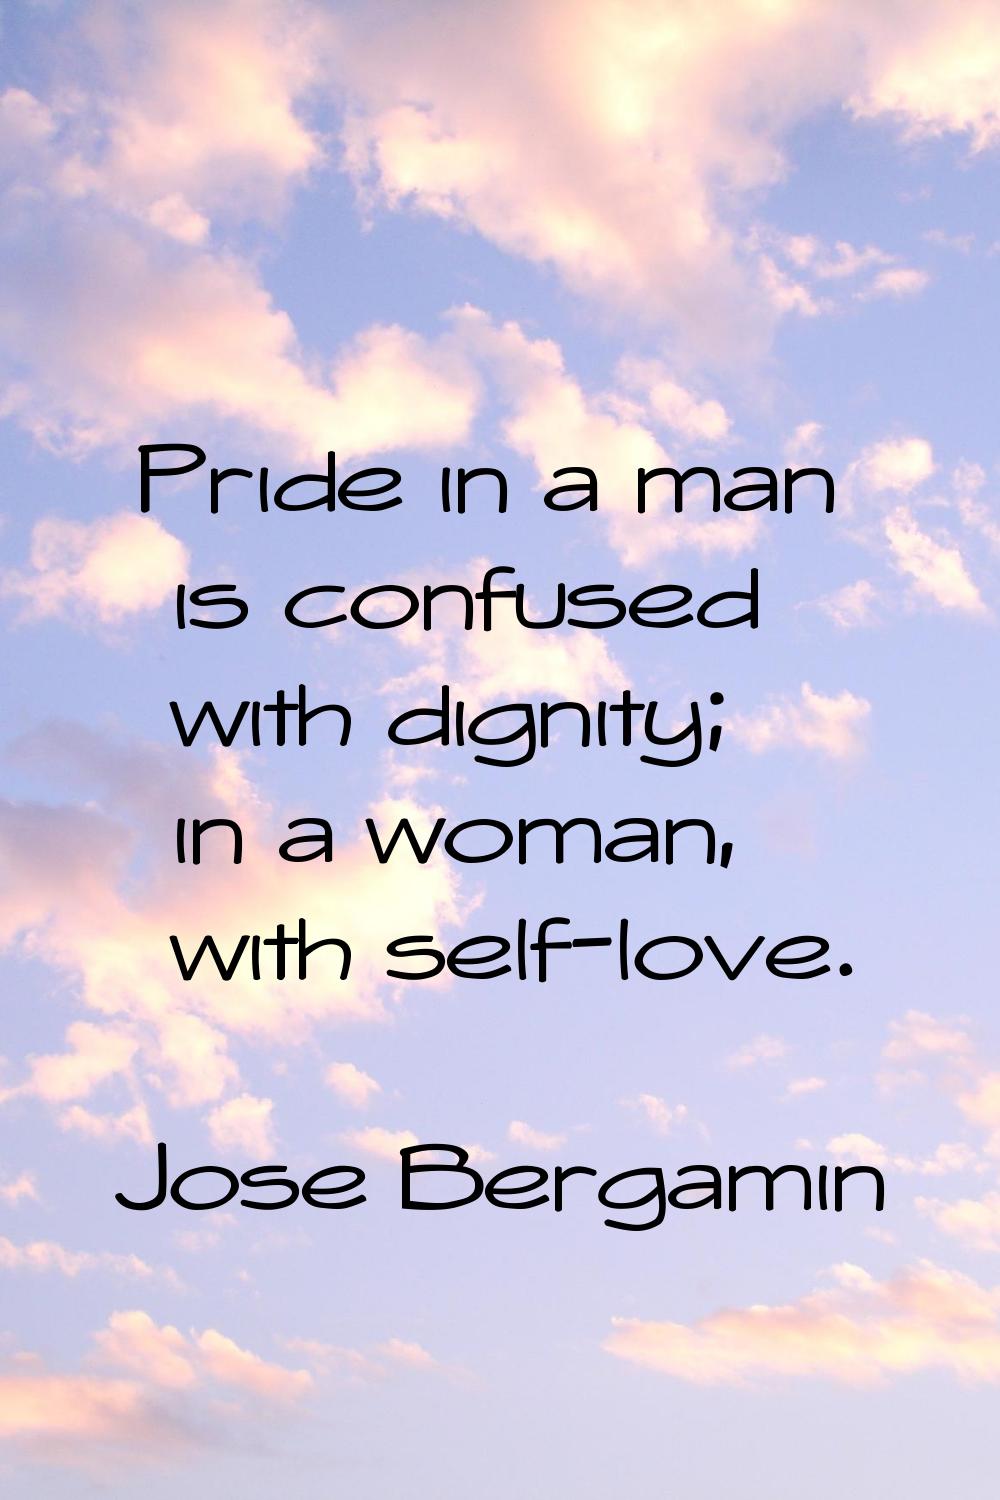 Pride in a man is confused with dignity; in a woman, with self-love.